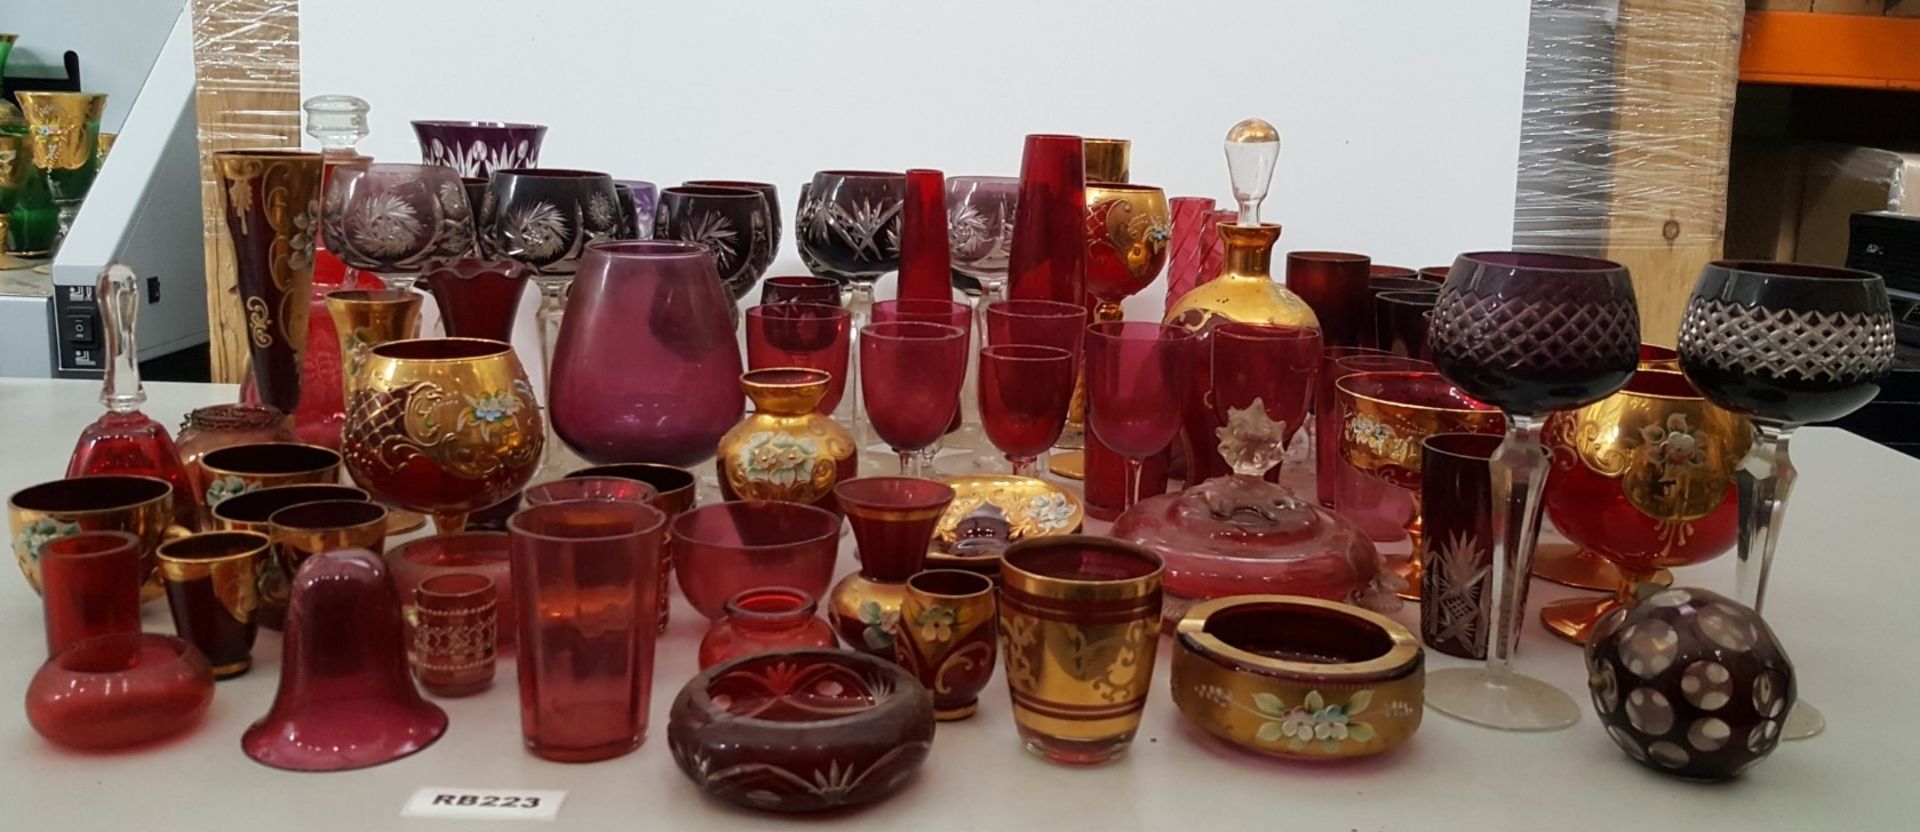 1 x Joblot Of 60+ Pieces Of Vintage Glasswear - Ref RB223 I - Image 6 of 7